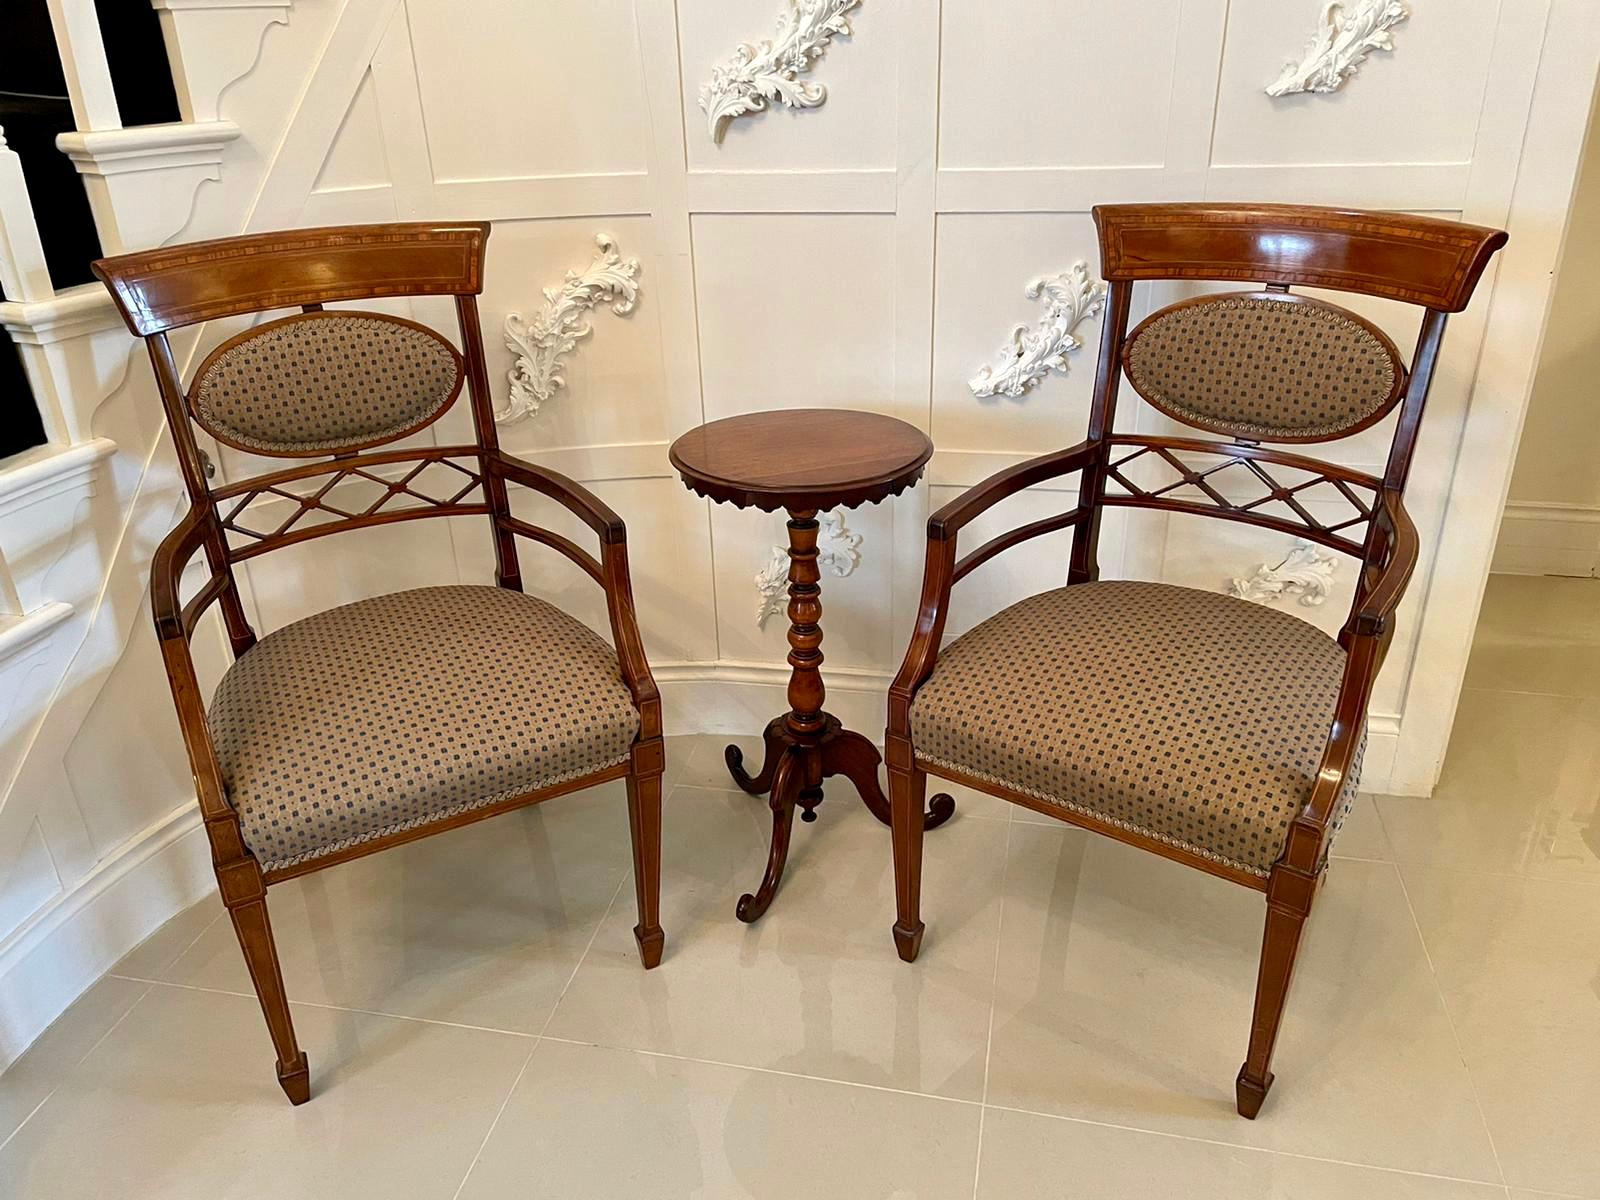 English Pair of 19th Century Antique Victorian Mahogany Inlaid Desk Chairs